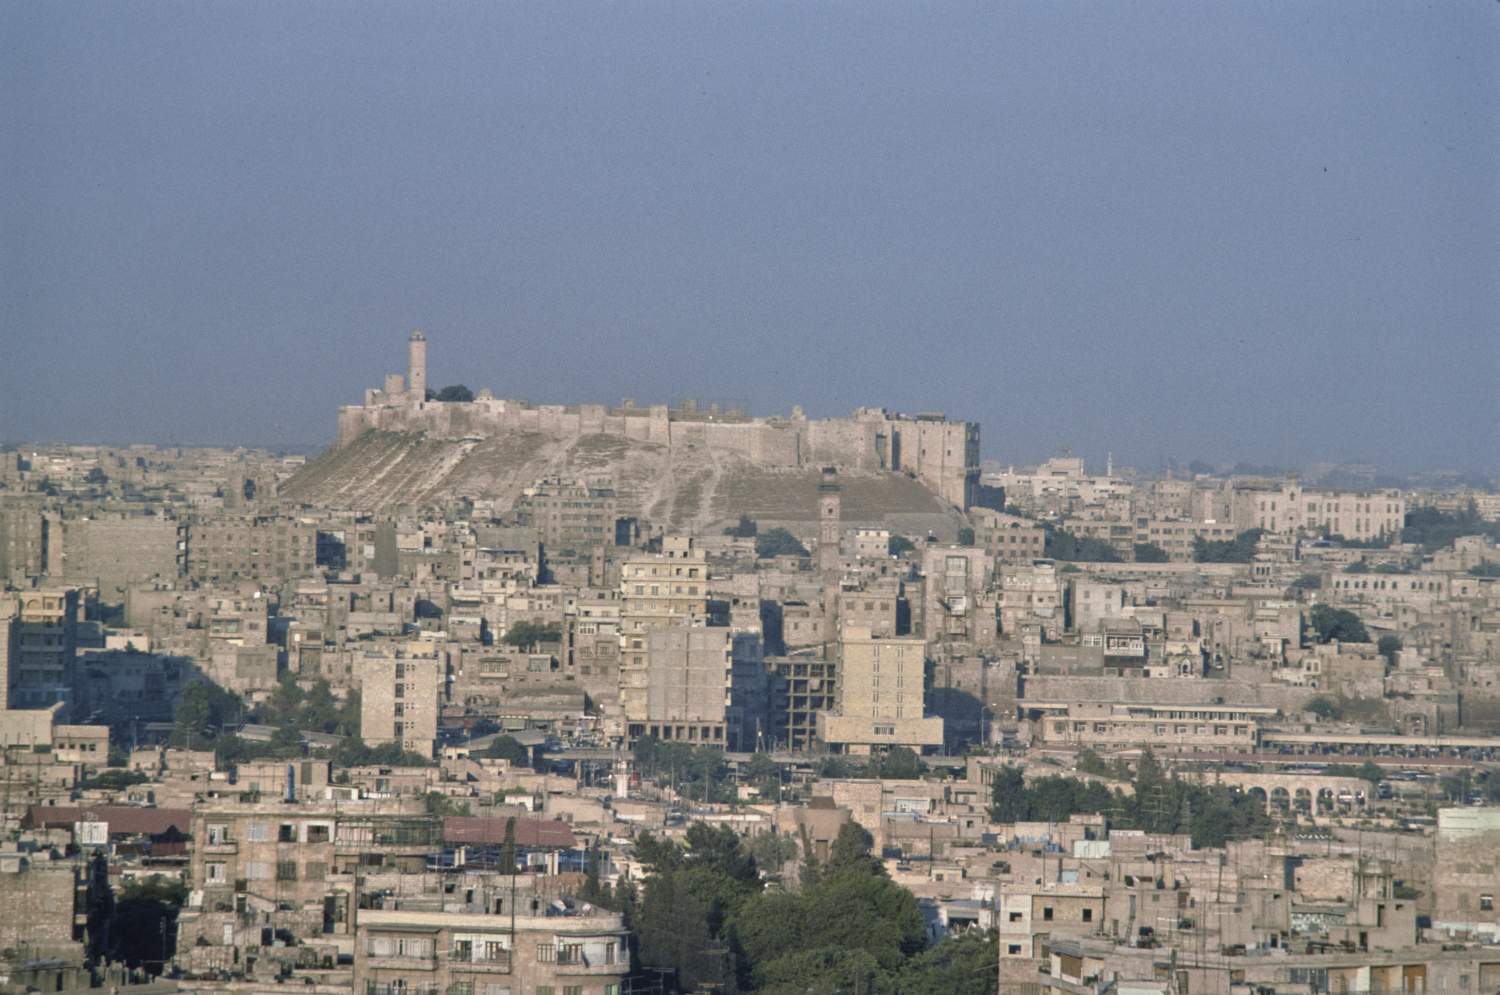 View over city toward citadel from west.